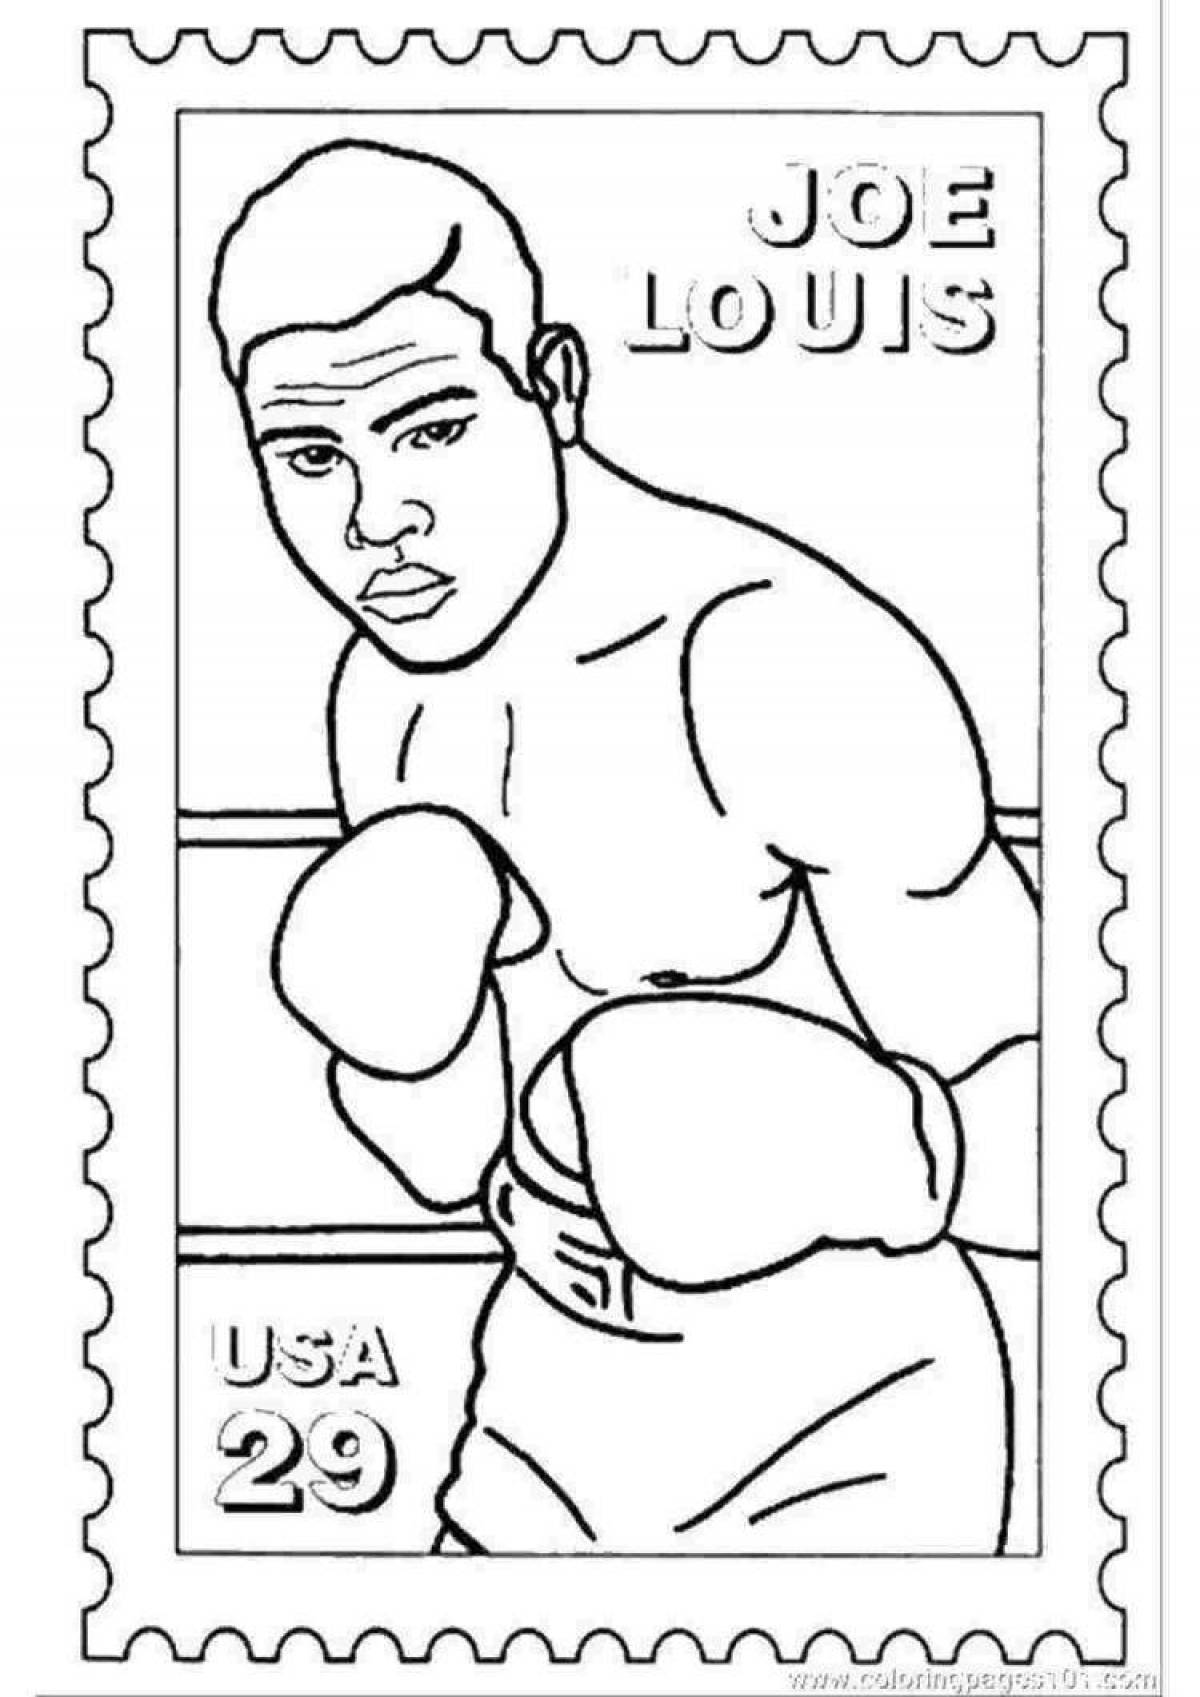 Amazing boxing and boo coloring for kids